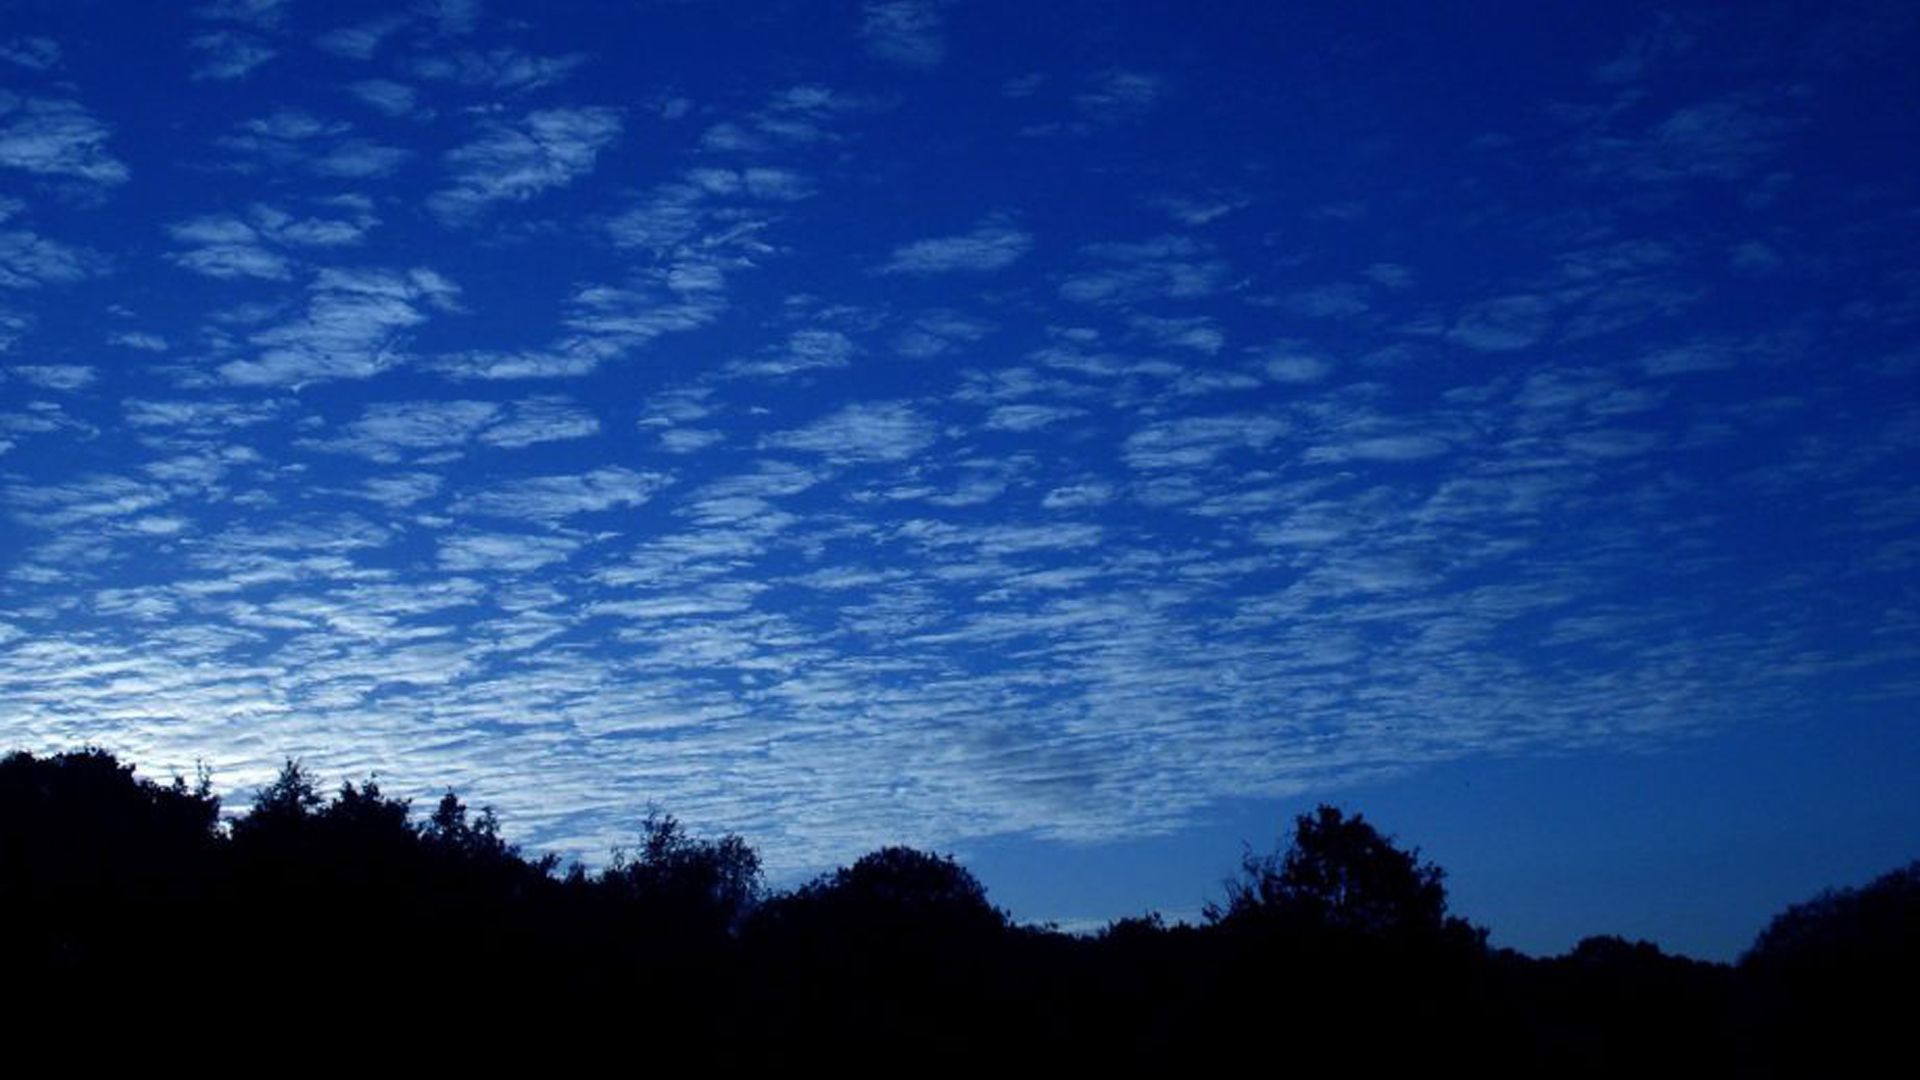 A sky with clouds and trees in the foreground - Sky